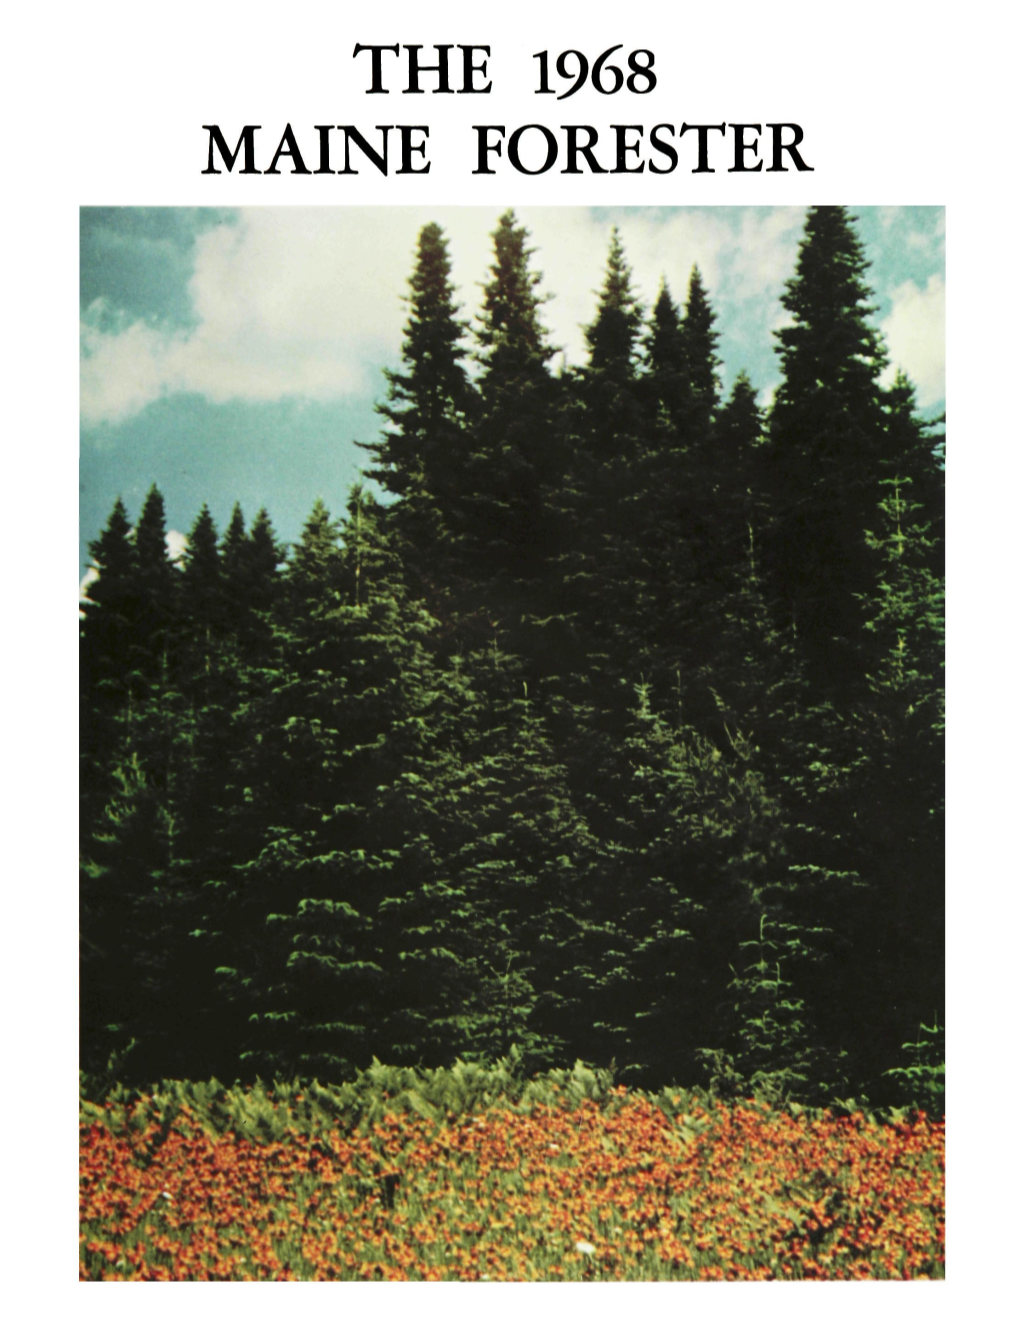 The 1968 Maine Forester